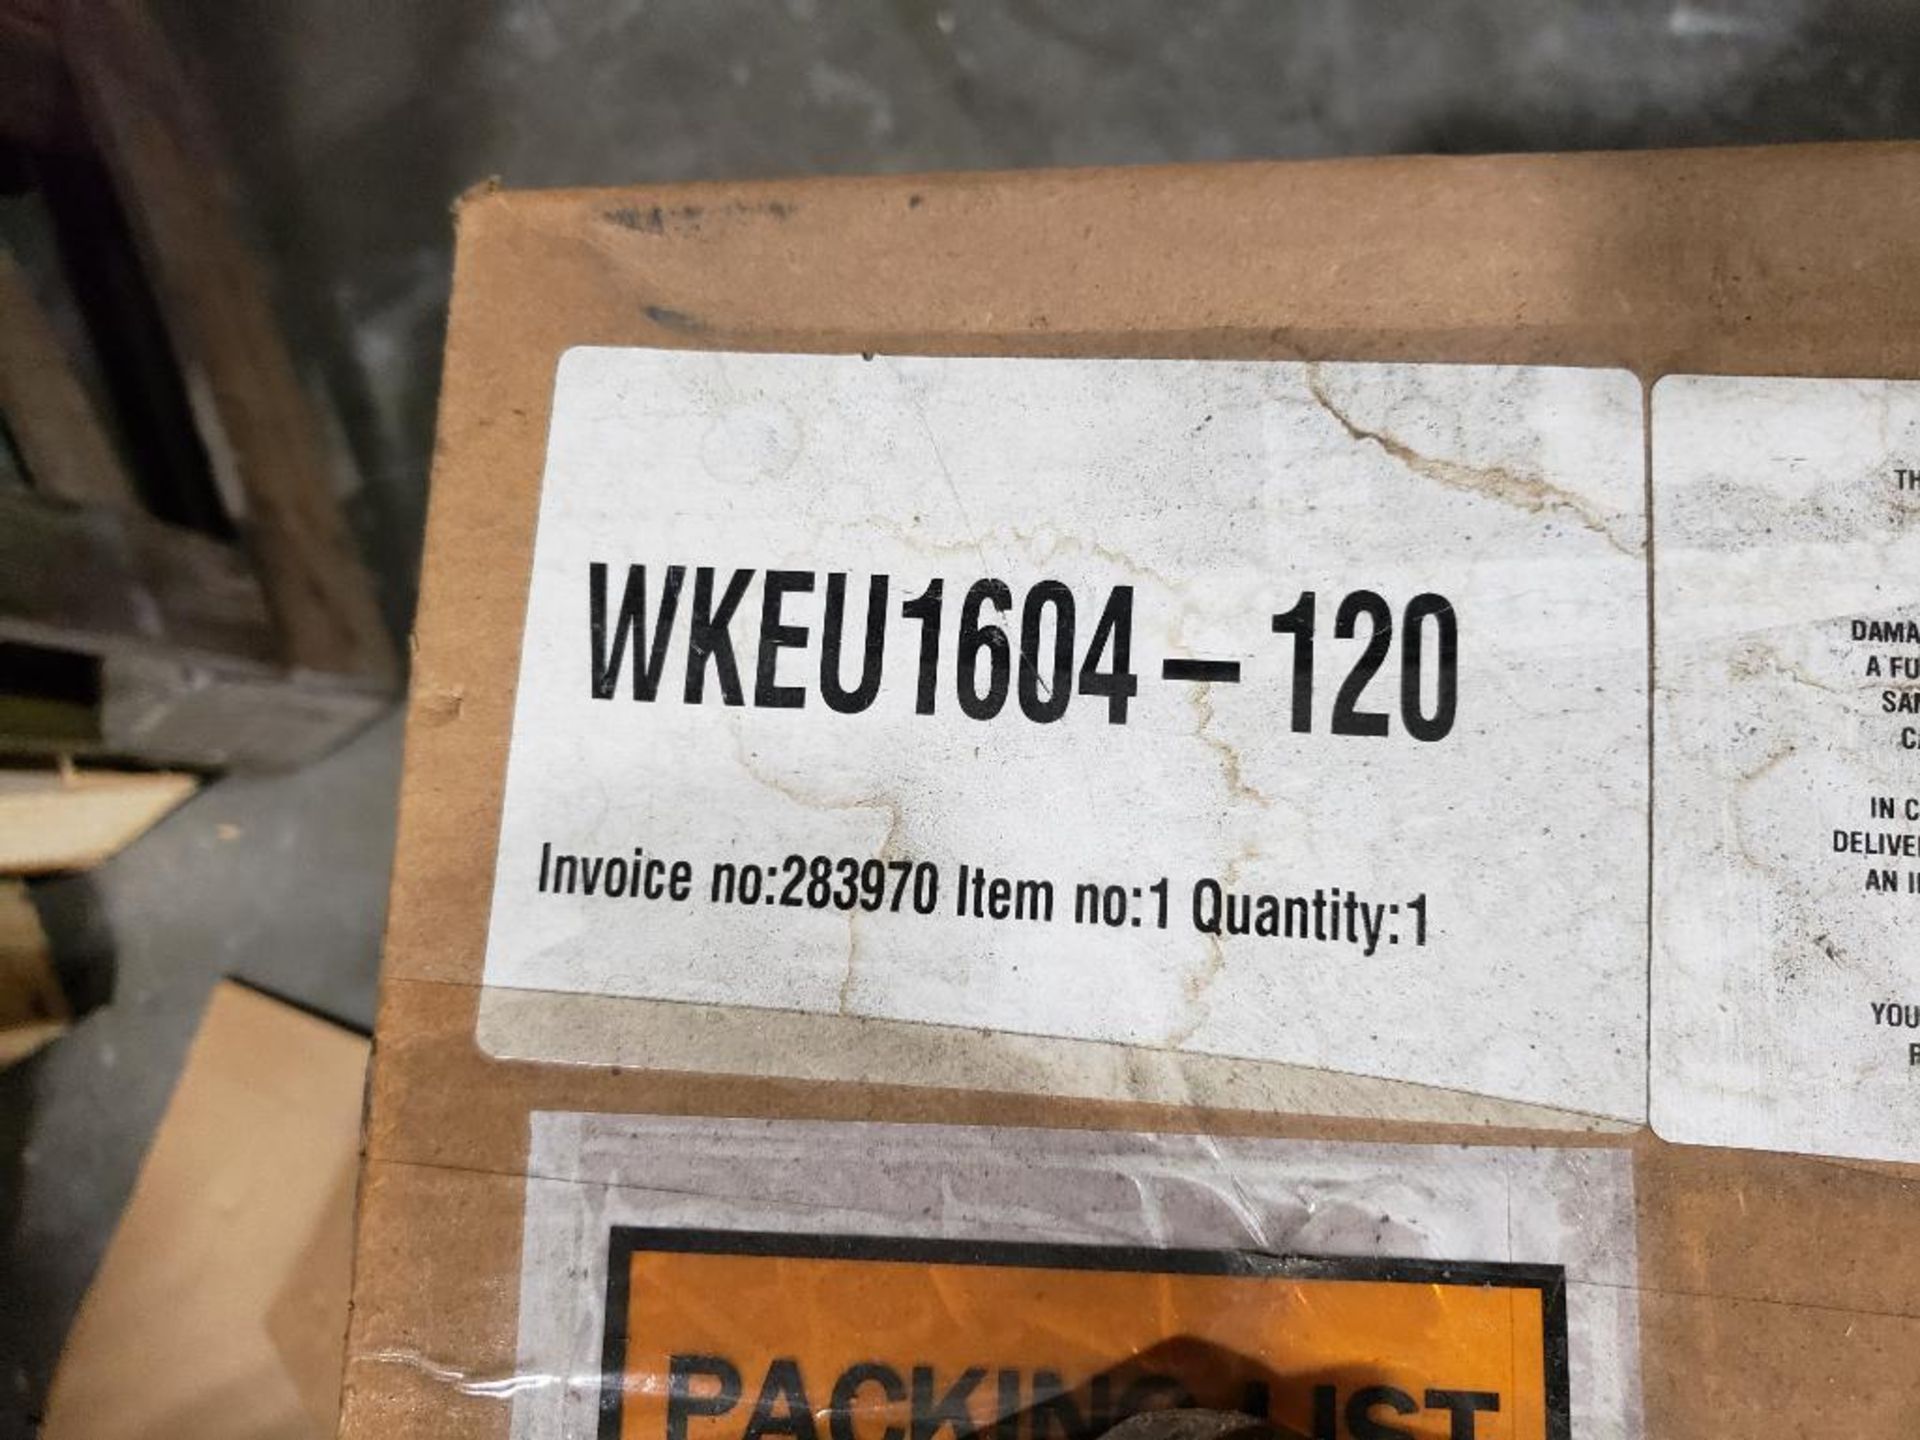 Electric heater kit. Part number WKEU1604-120. . - Image 2 of 4